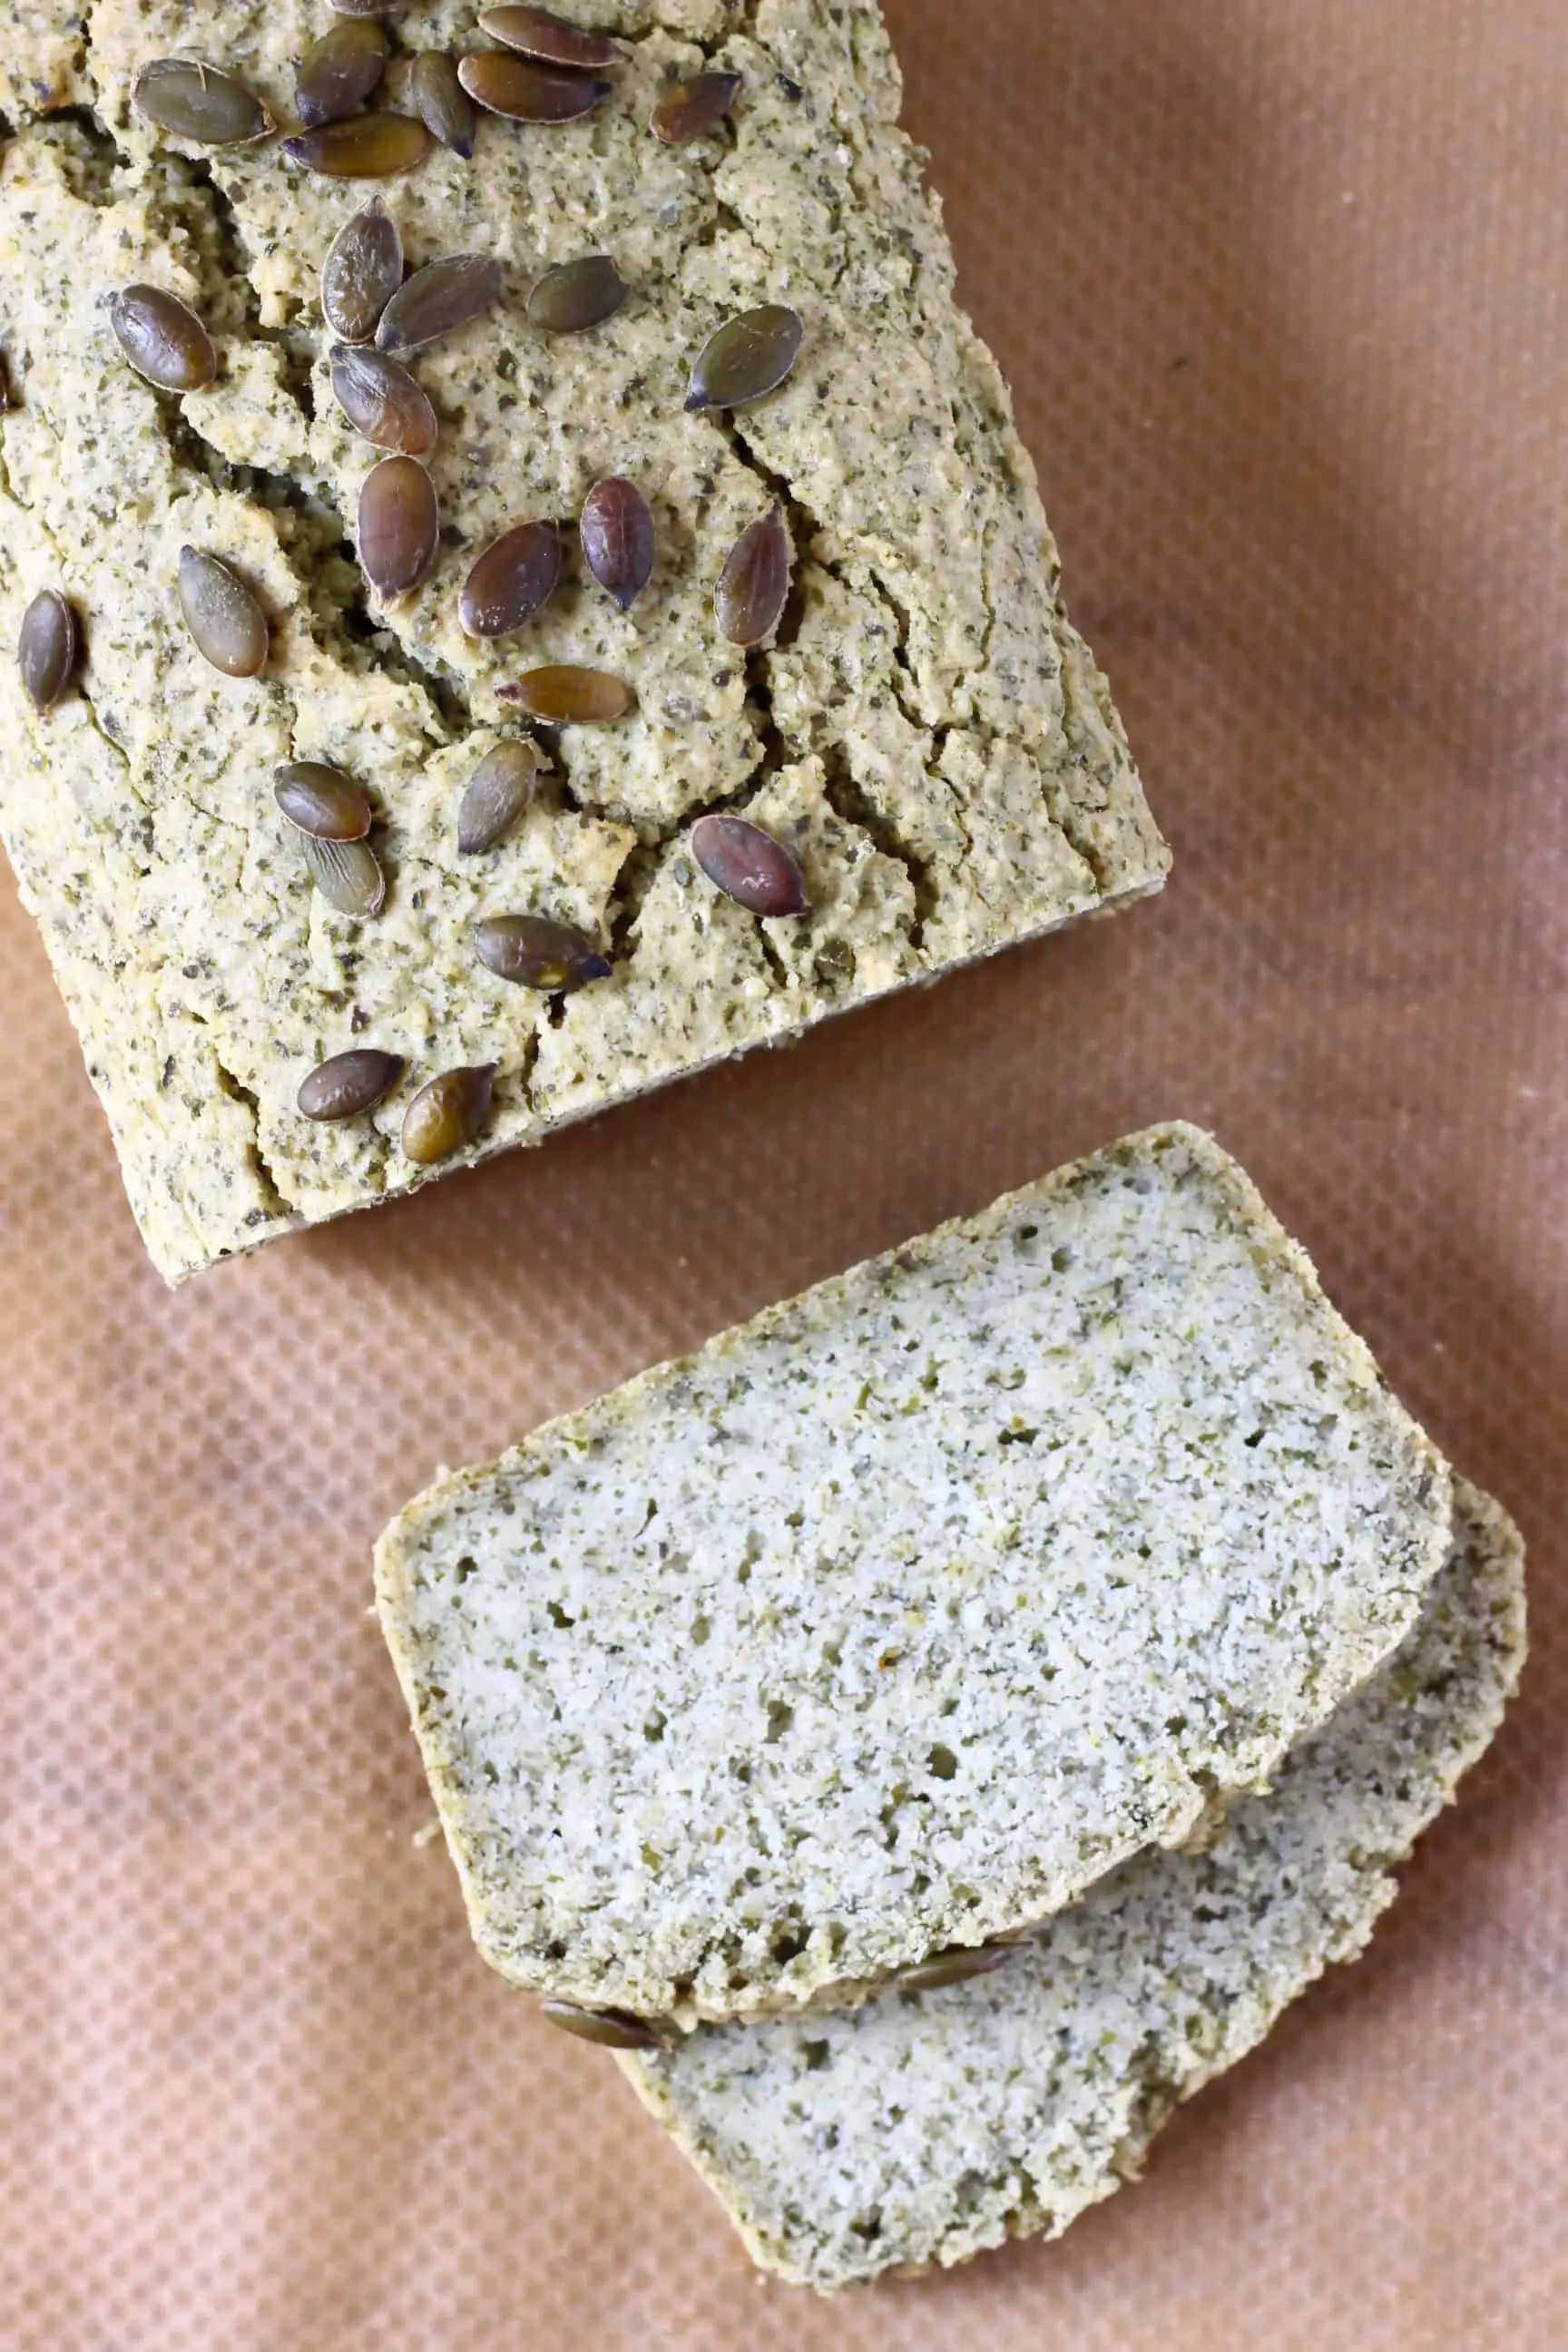 A loaf of pumpkin seed bread with two slices next to it against a sheet of brown baking paper